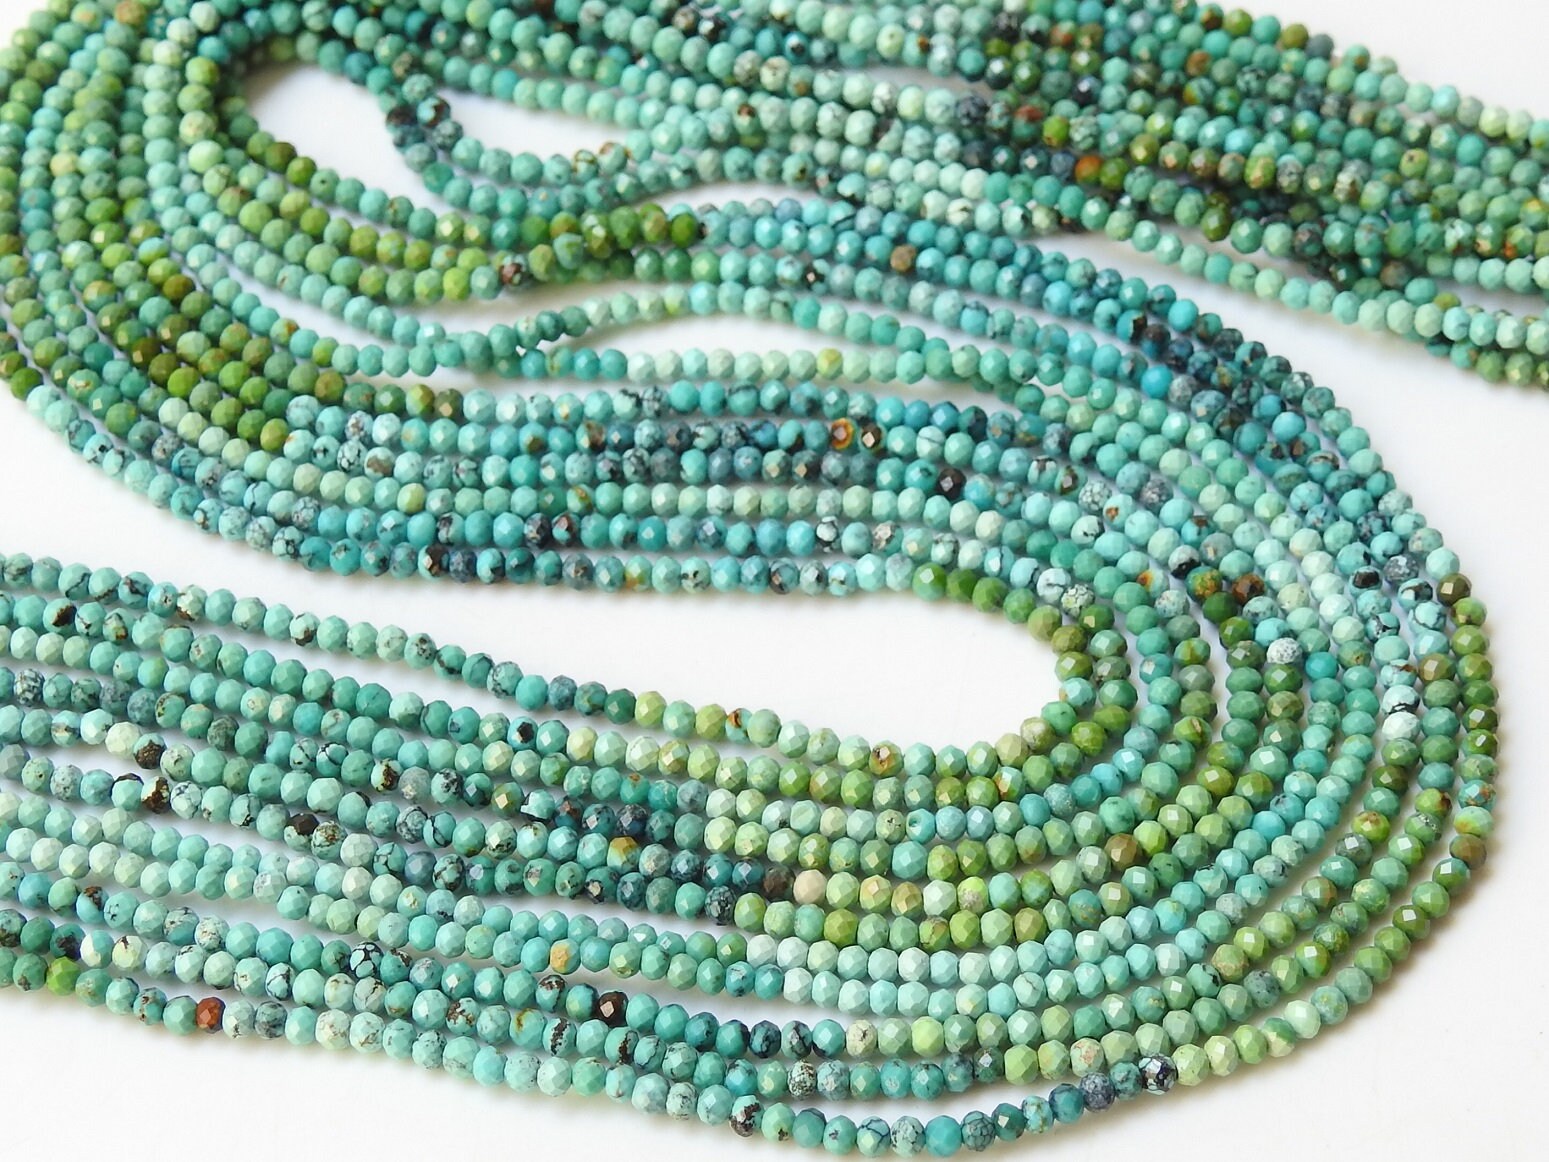 Arizona Turquoise Micro Faceted Roundel Beads,Multi Shaded,Loose Stone,Wholesaler,Supplies,13Inch 2MM Approx,100%Natural PME-B2 | Save 33% - Rajasthan Living 17